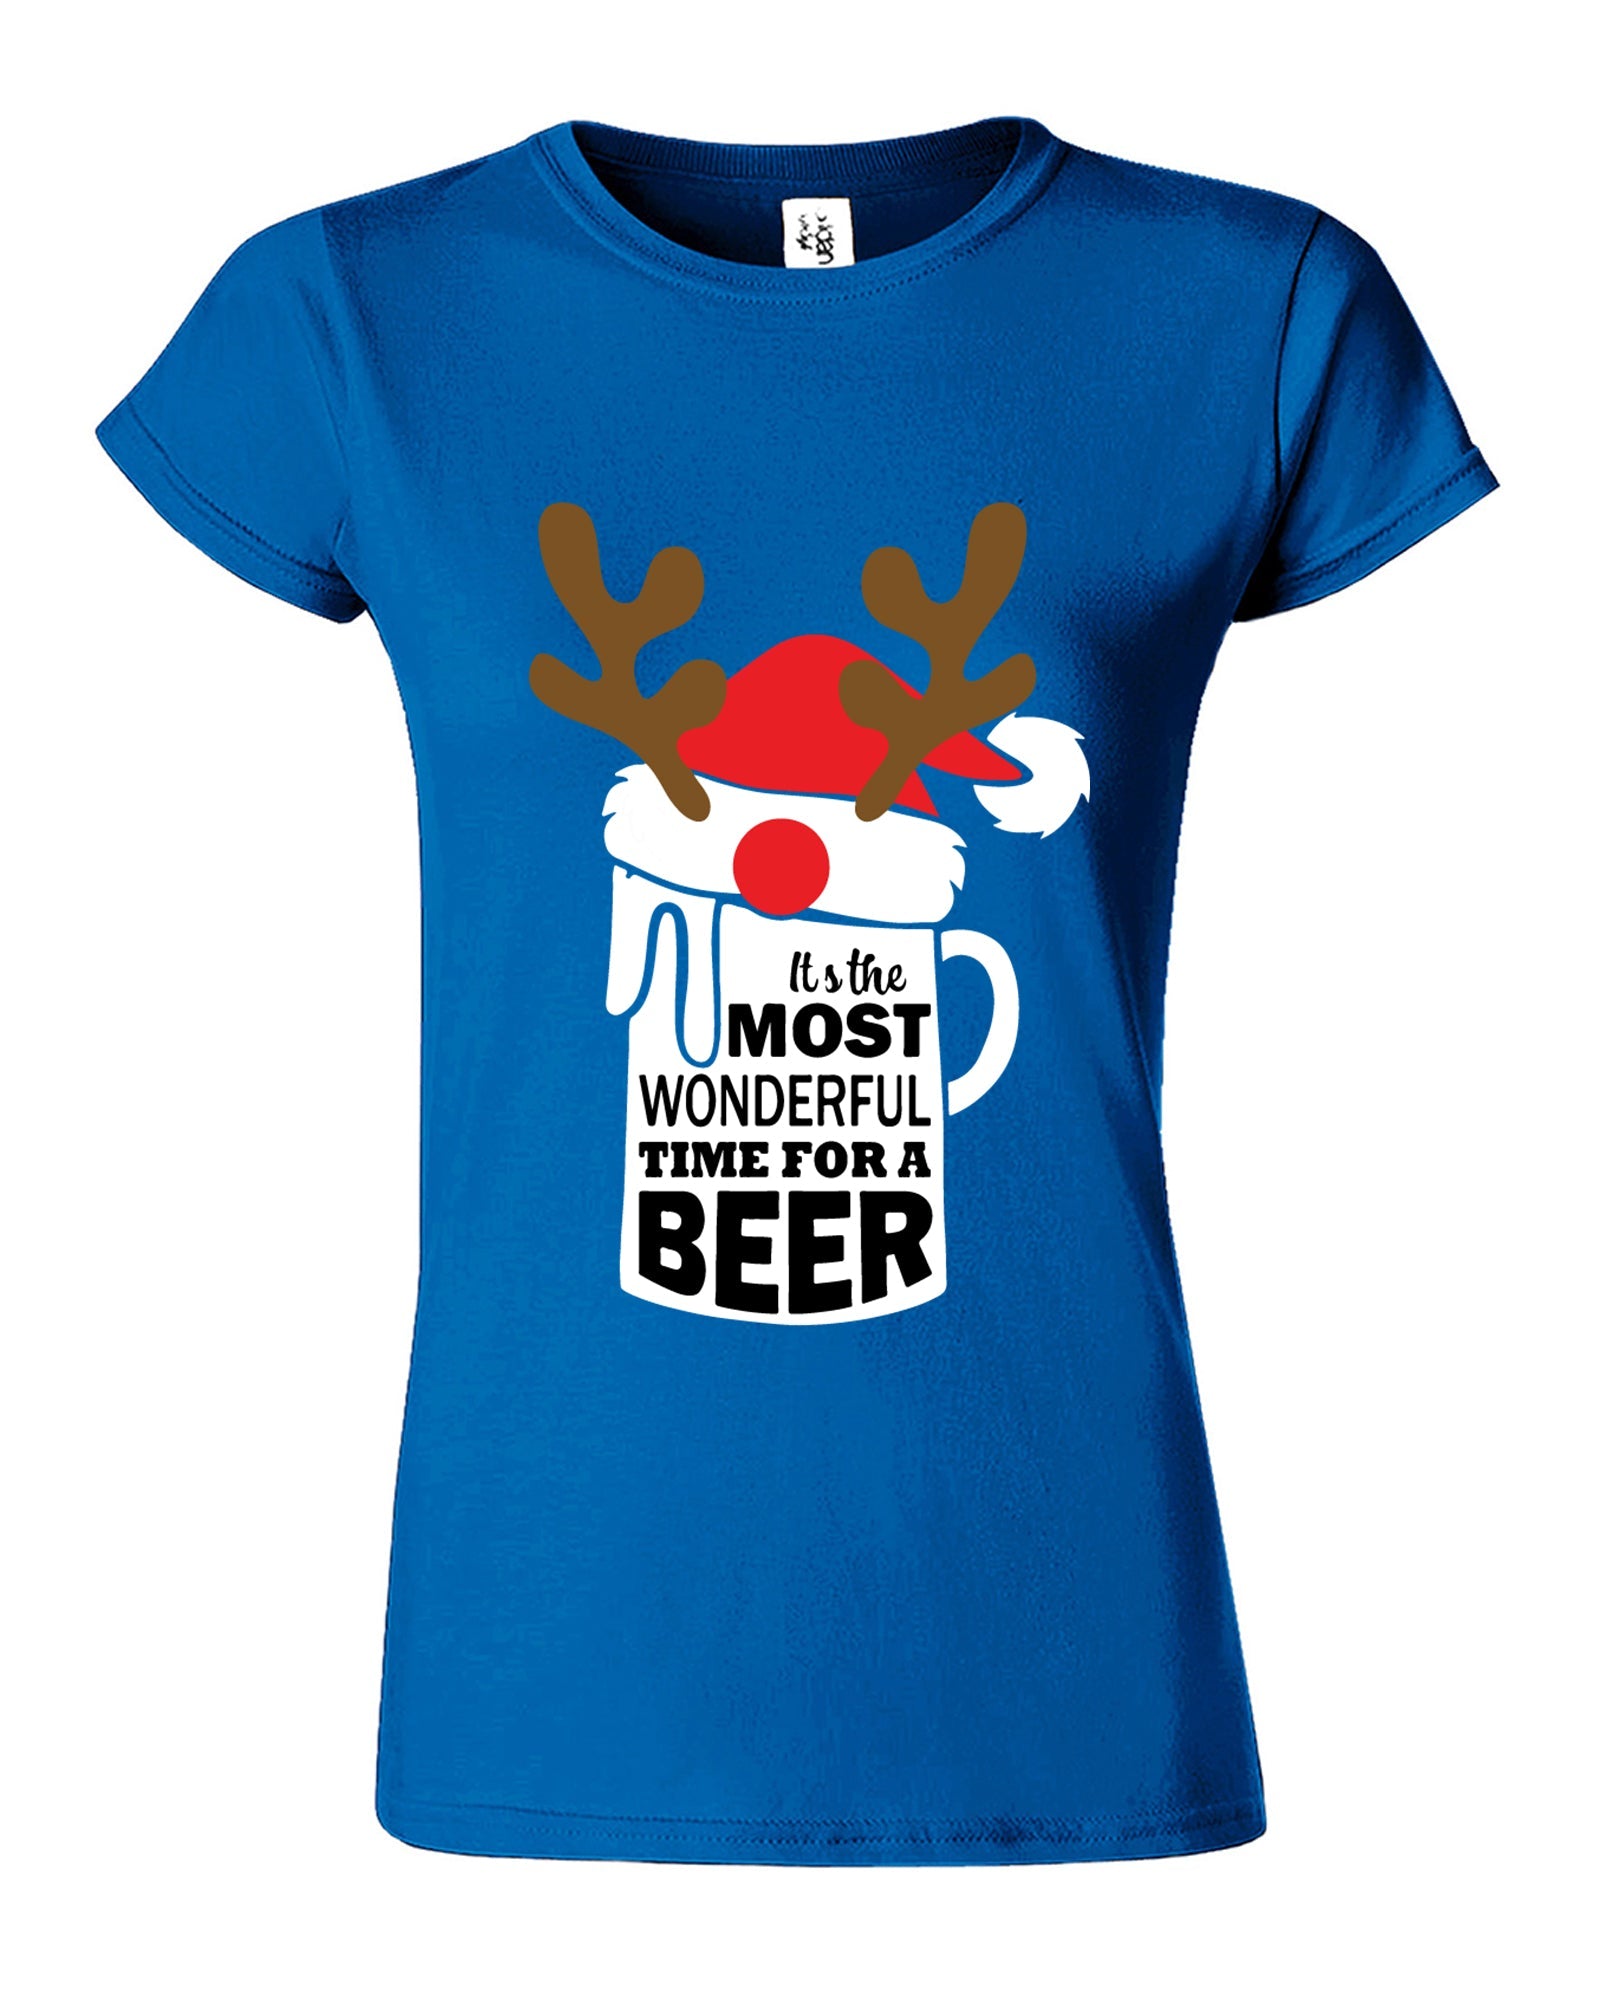 Time For A Beer Womens T-Shirt - ApparelinClick